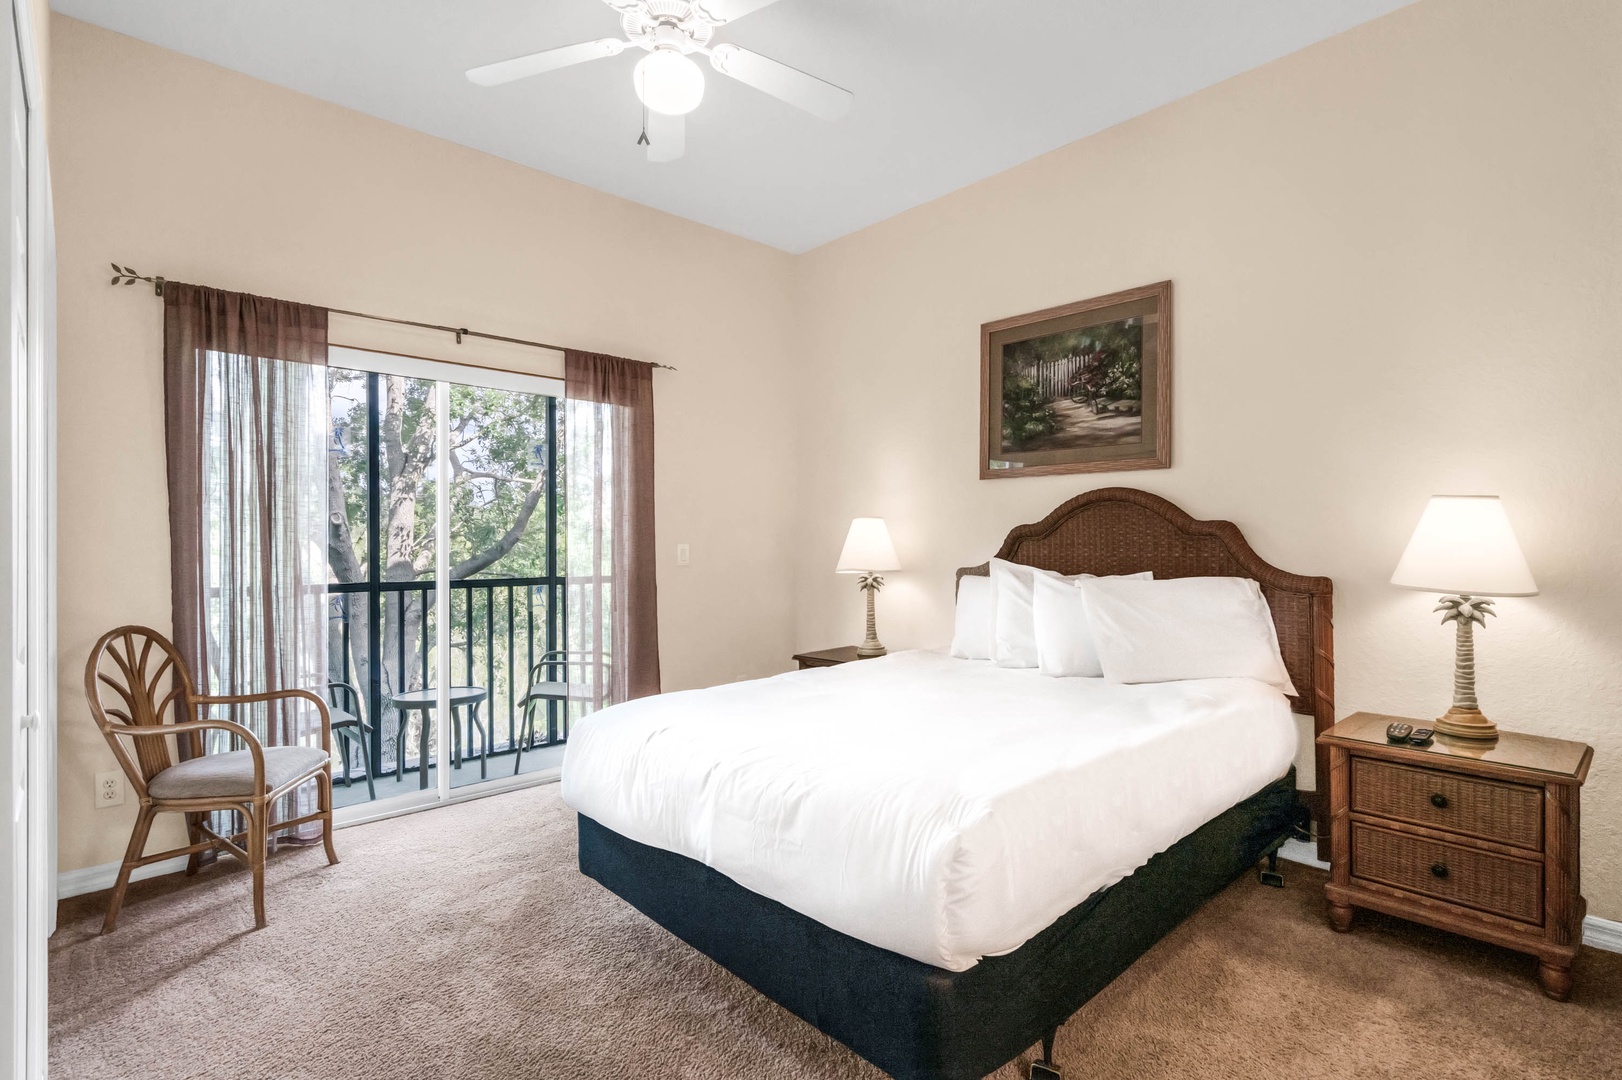 The luxurious queen master Suite offers ample space, en suite, balcony access, and TV